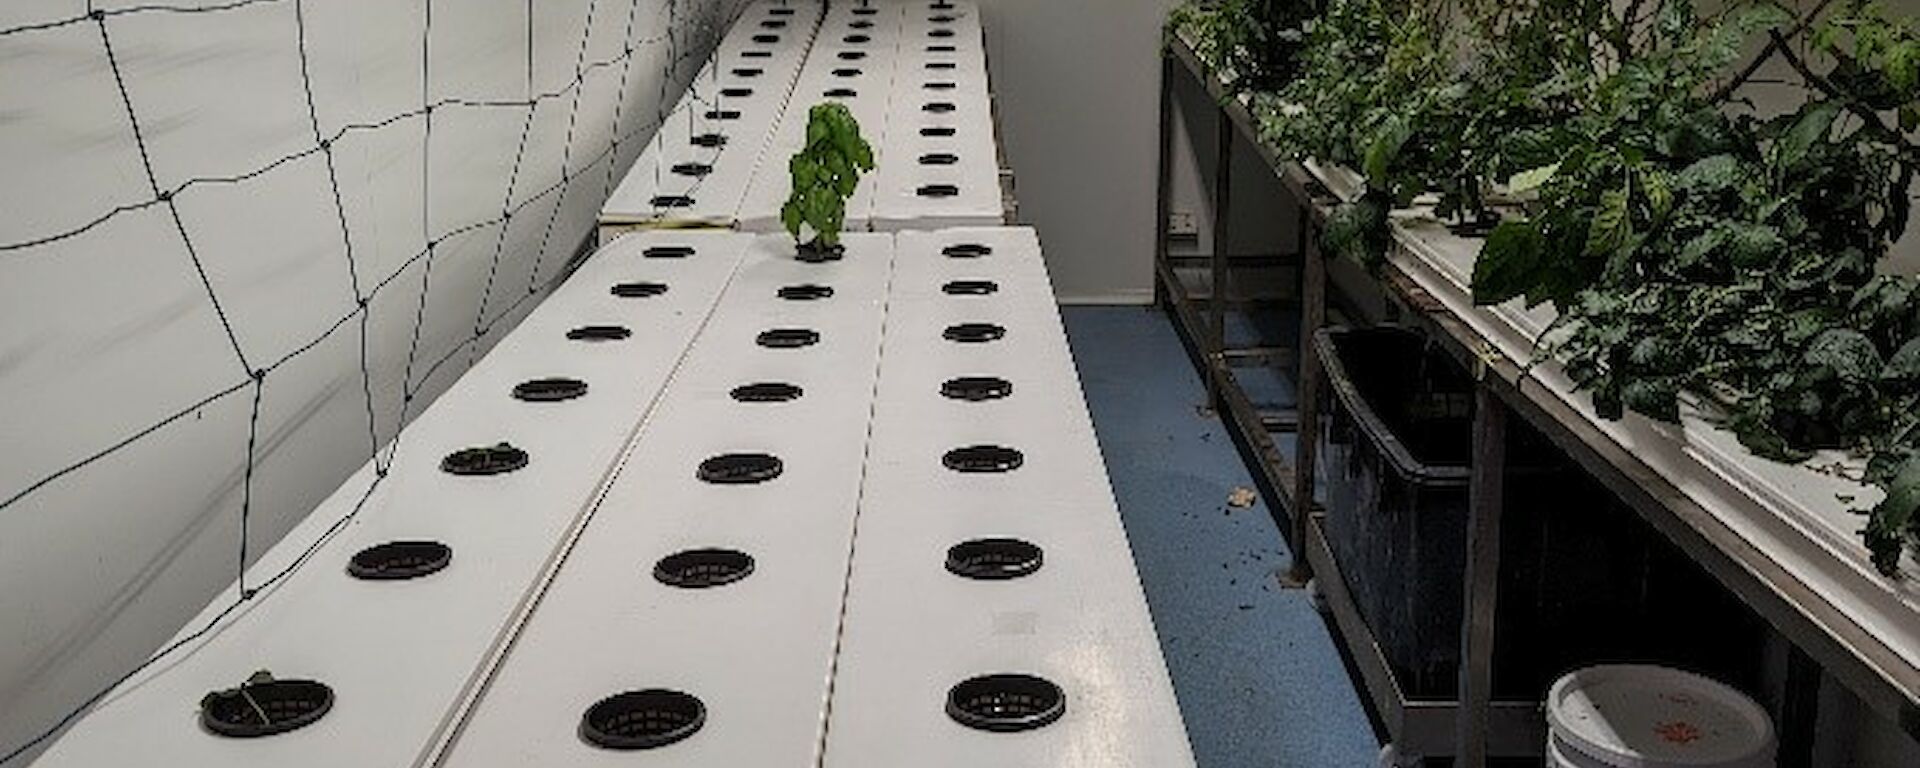 An inside view of the hydroponics building showing three rows of empty plant pots sitting in white trays down one wall and the opposite wall covered in green vines